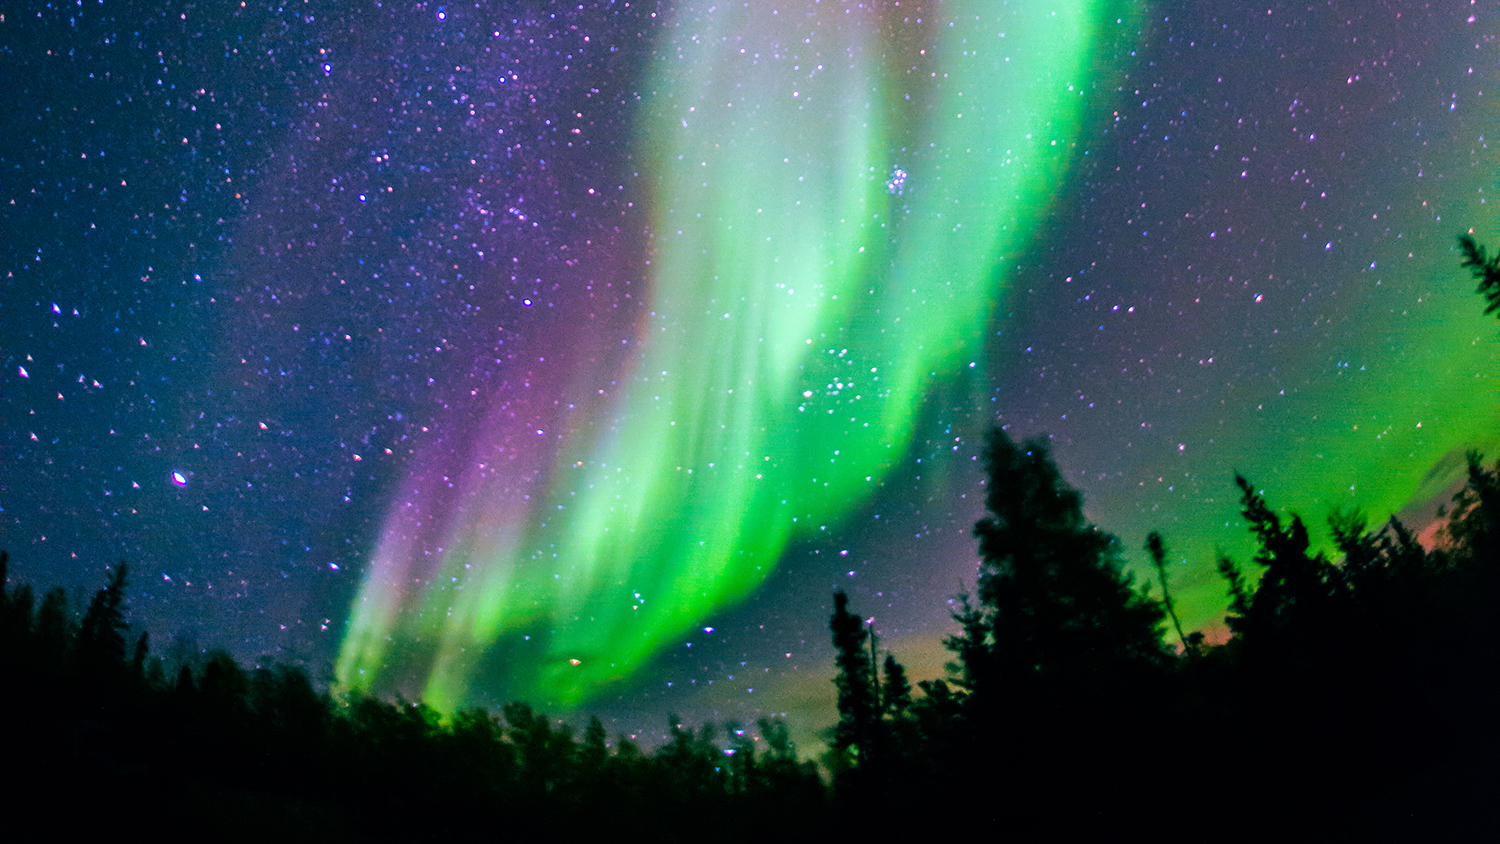 The bright northern lights with bright greens and purples in the night sky at Yellowknife.